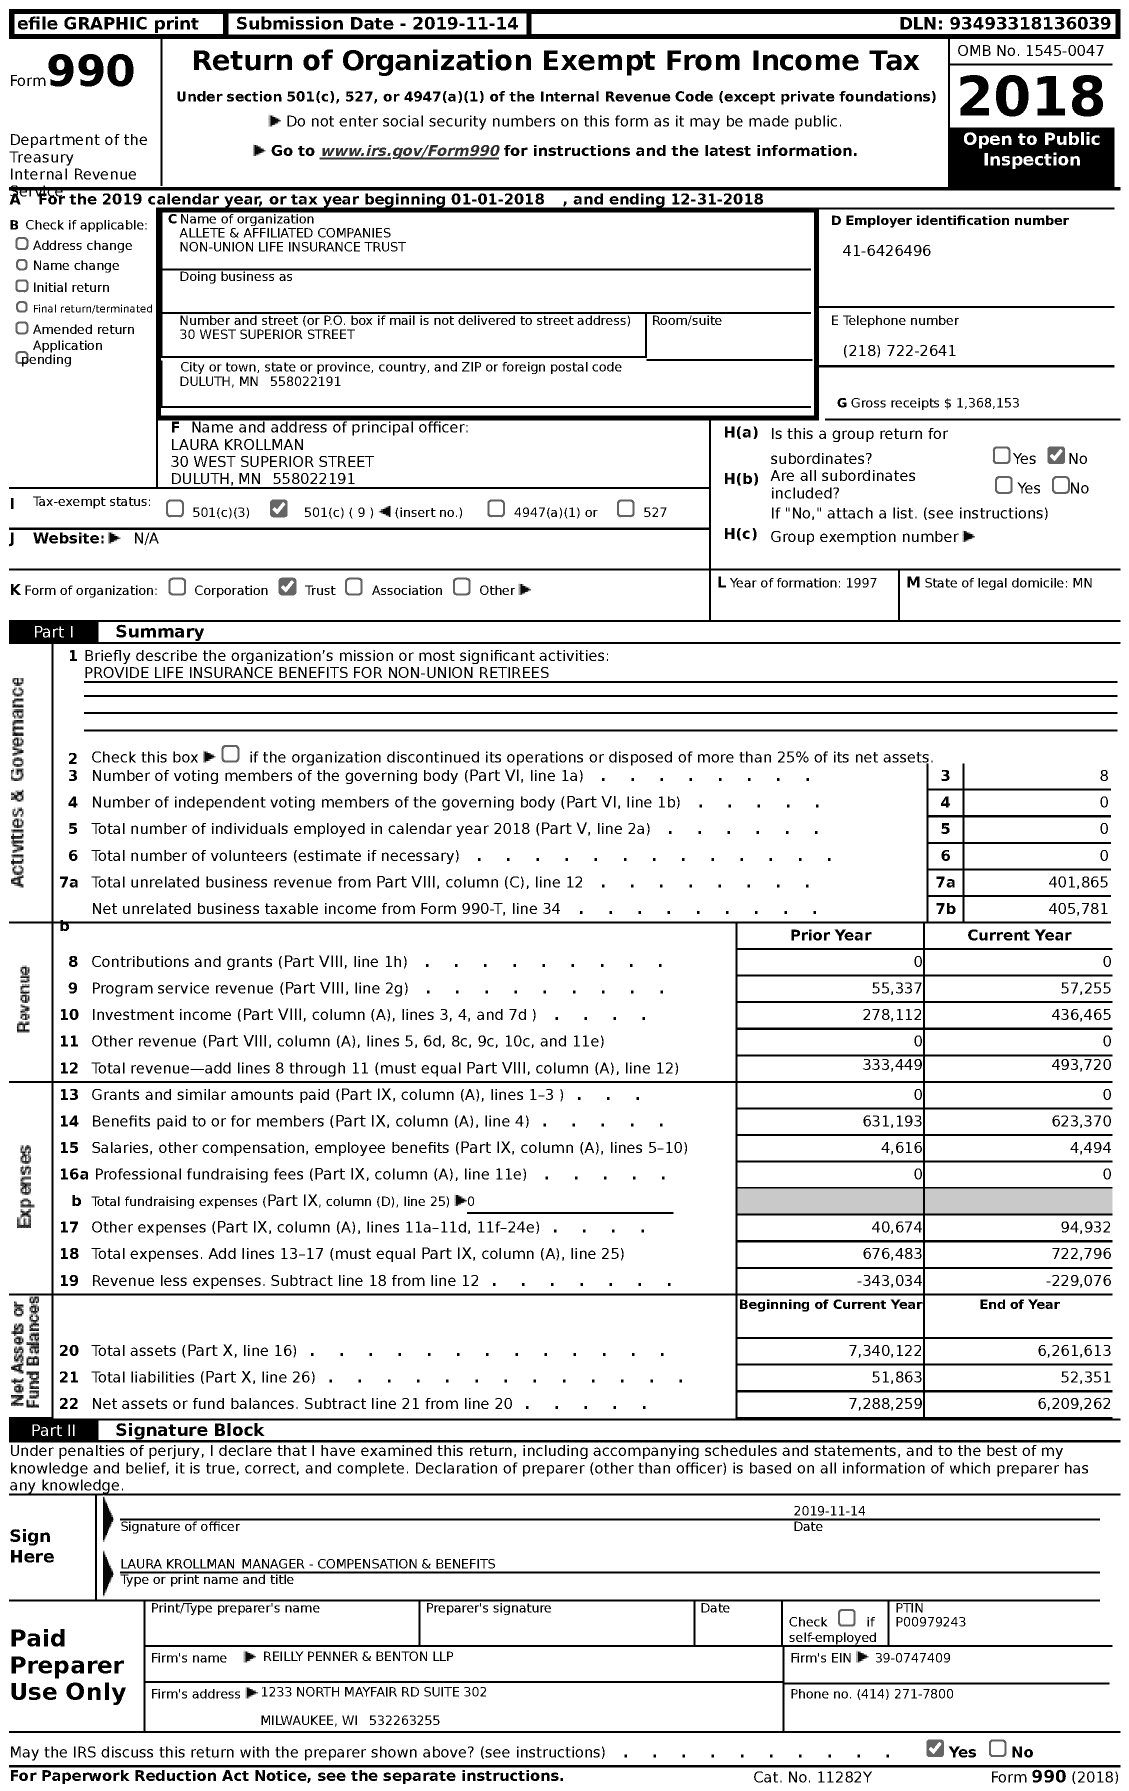 Image of first page of 2018 Form 990 for Allete and Affiliated Companies Non-Union Life Insurance Trust